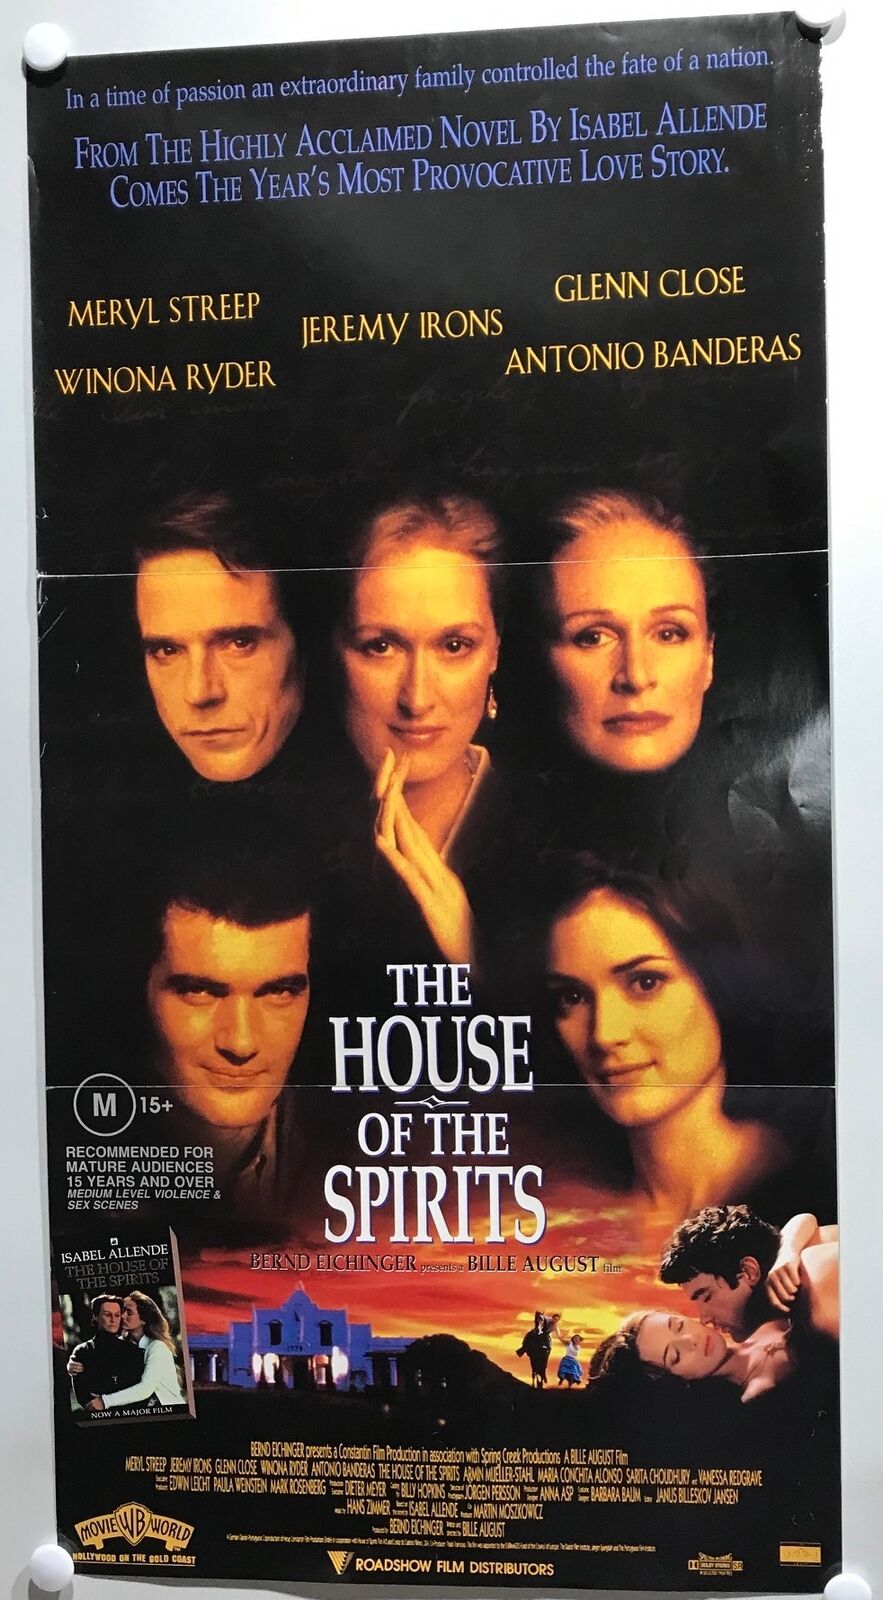 ORIGINAL DAYBILL MOVIE POSTER - THE HOUSE OF THE SPIRITS - 1993